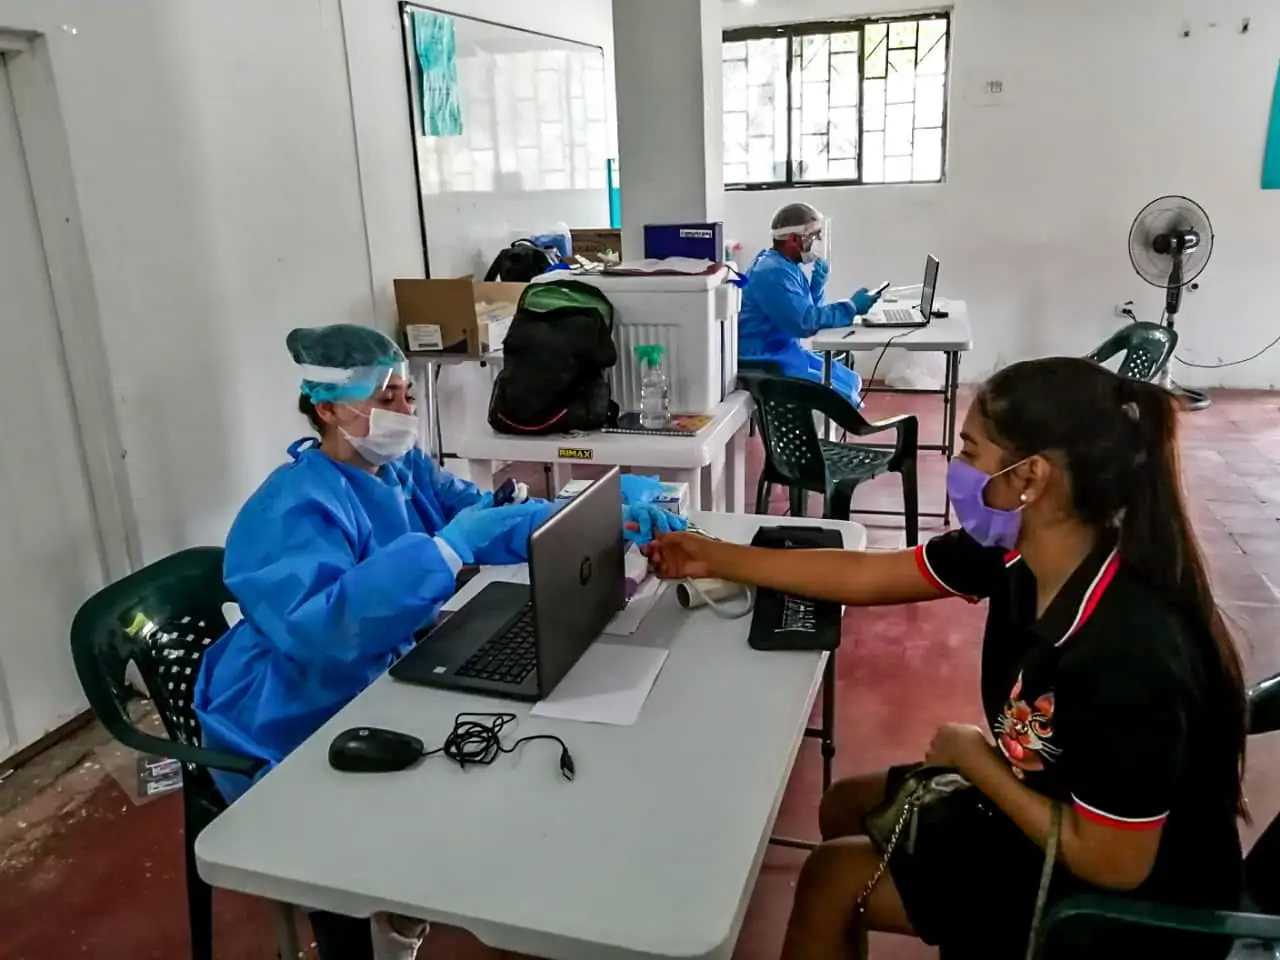 Head nurse interviewing patient sitting at a table in Colombia clinic